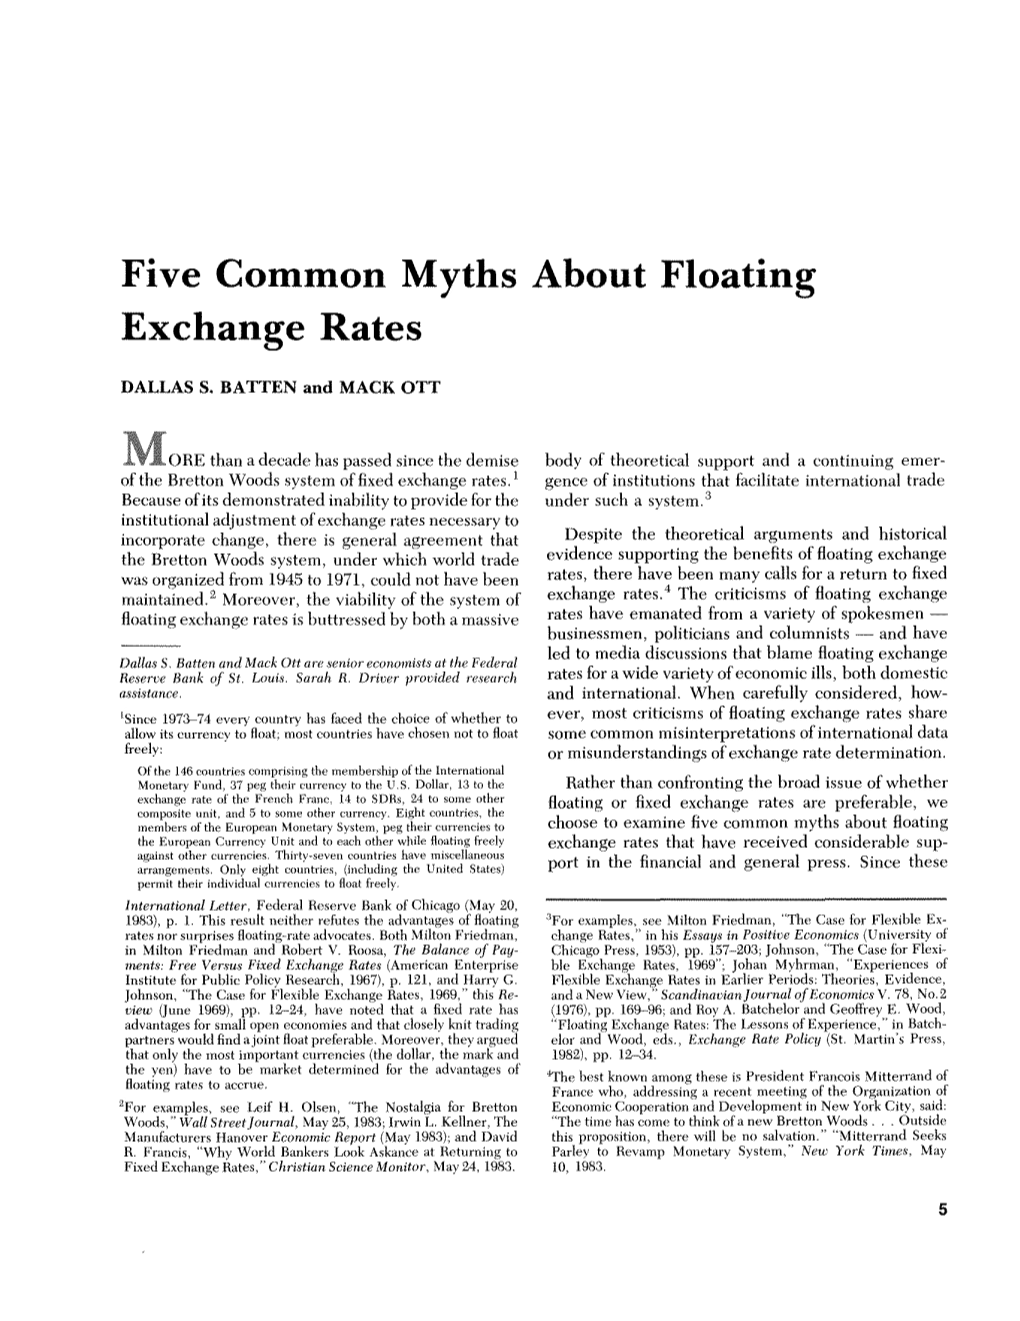 Five Common Myths About Floating Exchange Rates